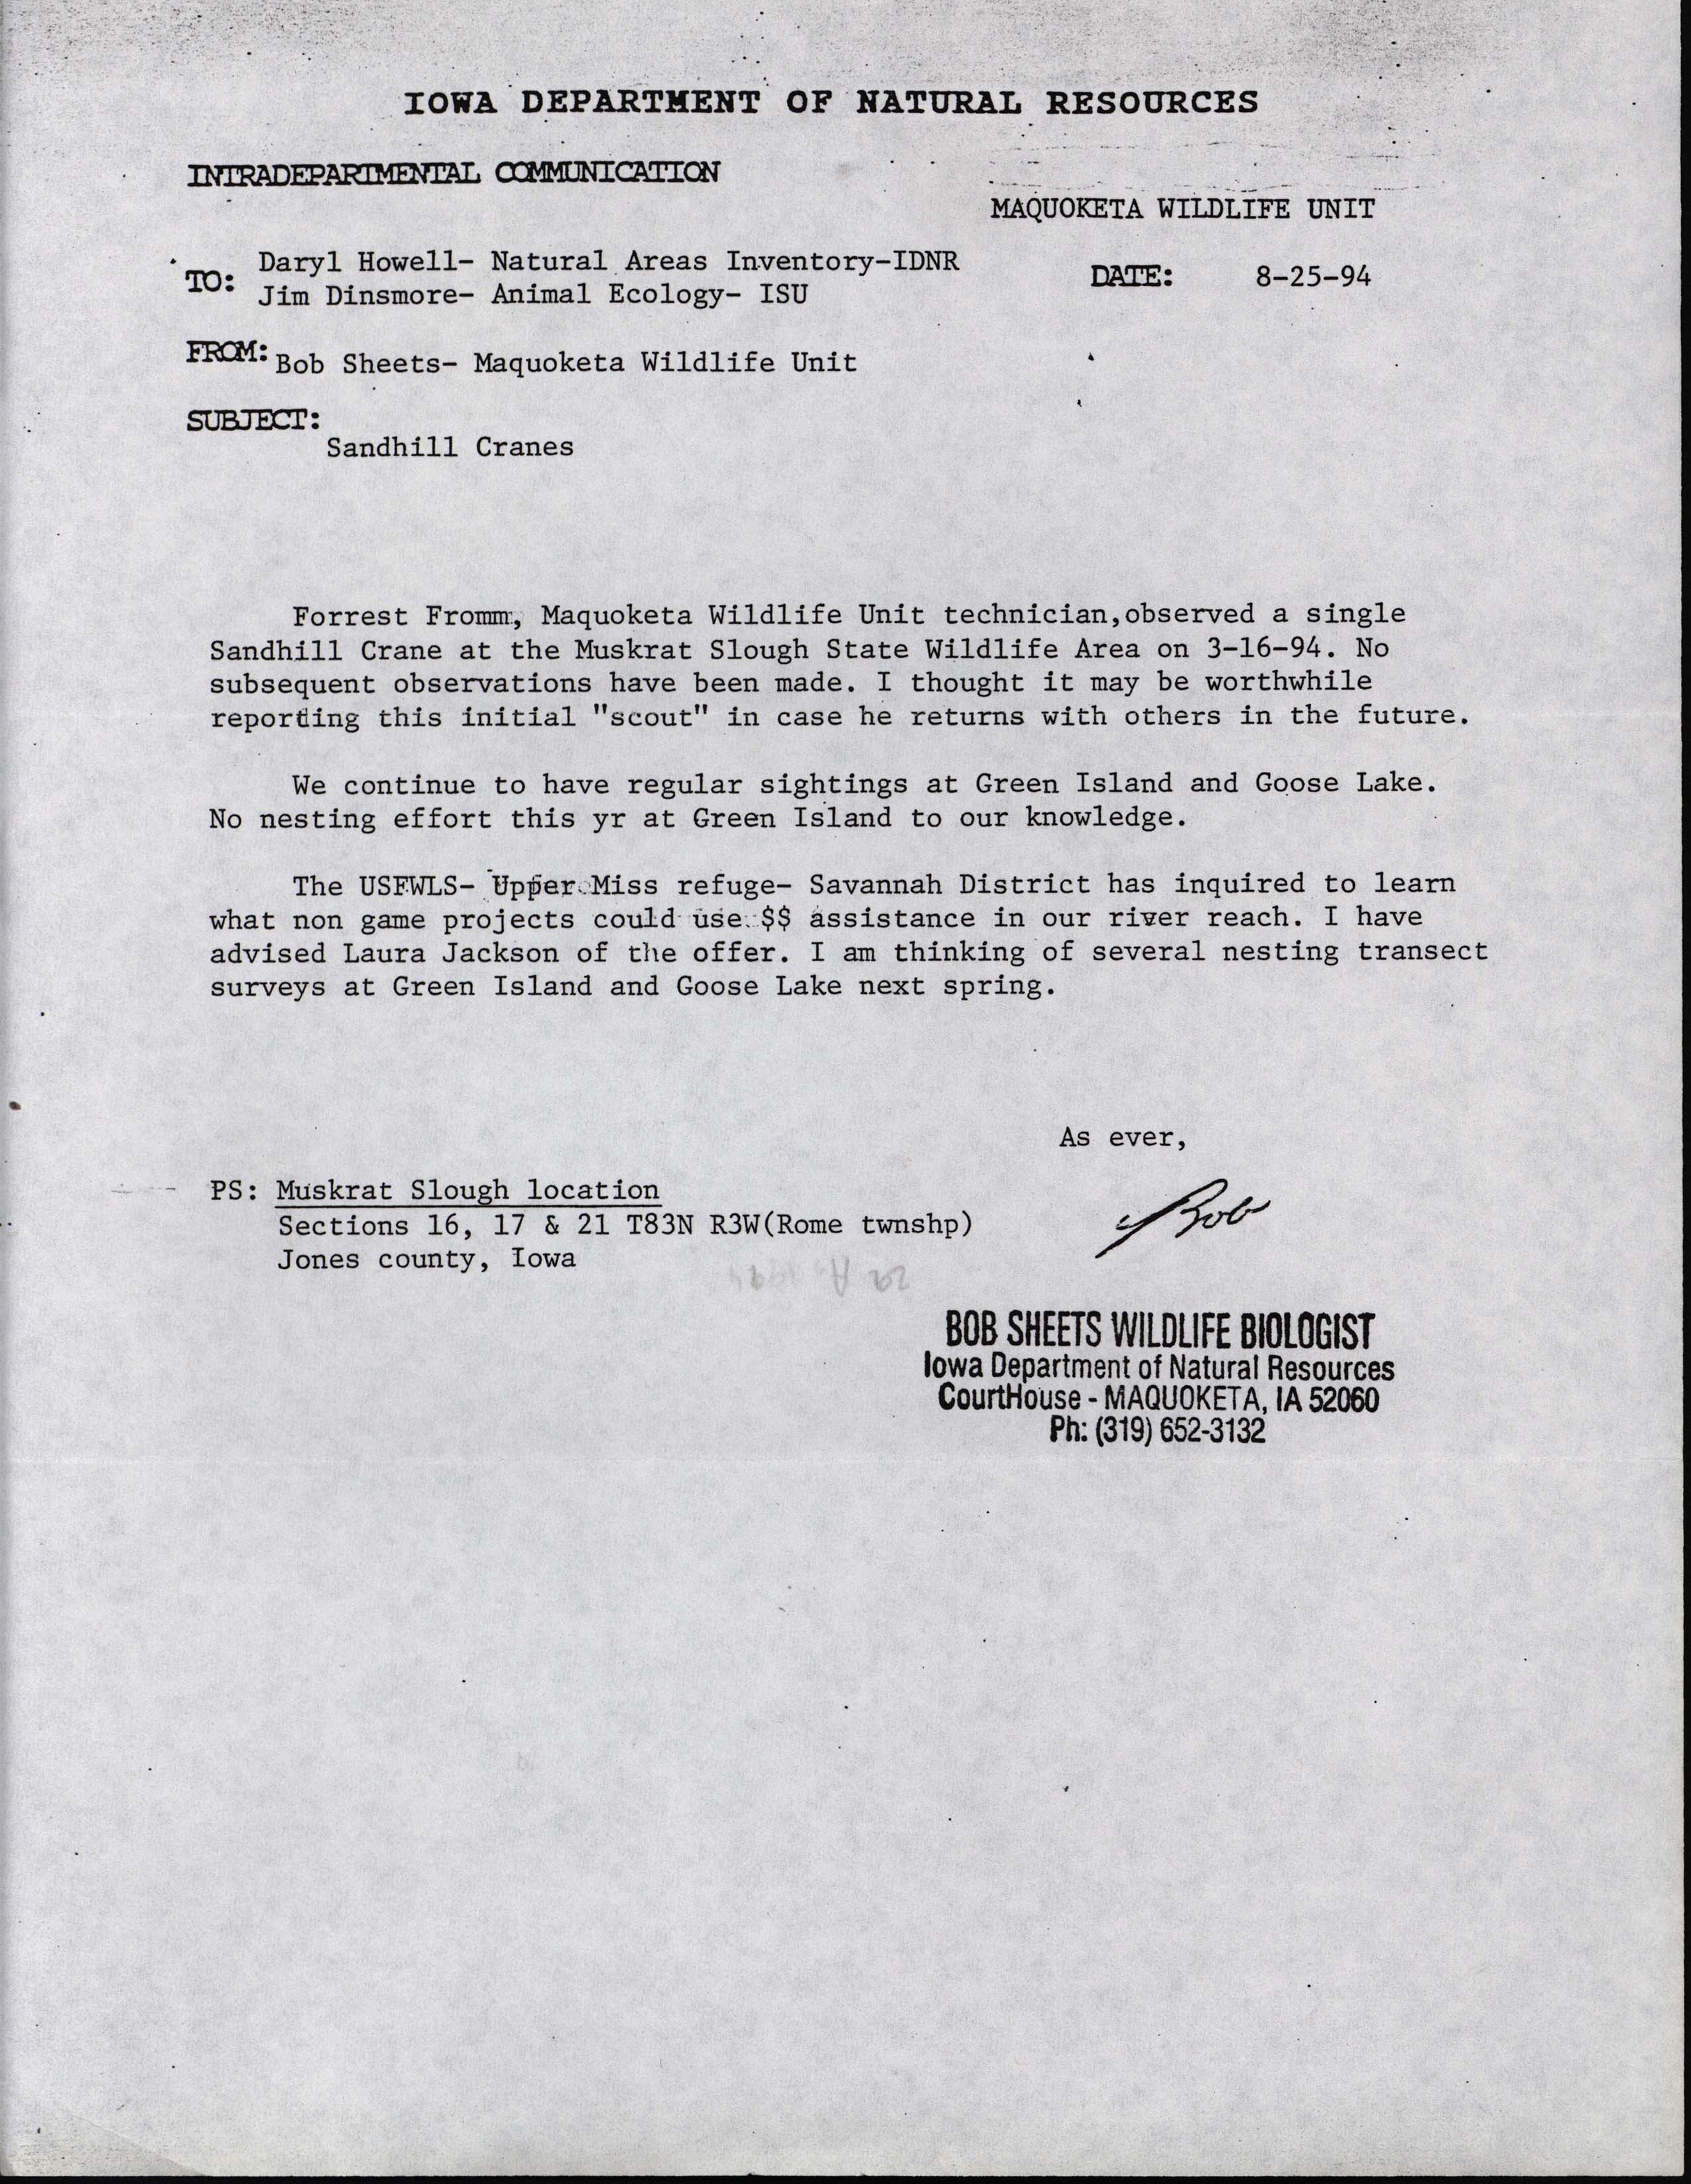 Bob Sheets letter to Daryl Howell and Jim Dinsmore regarding Sandhill Crane sighting, August 25, 1994